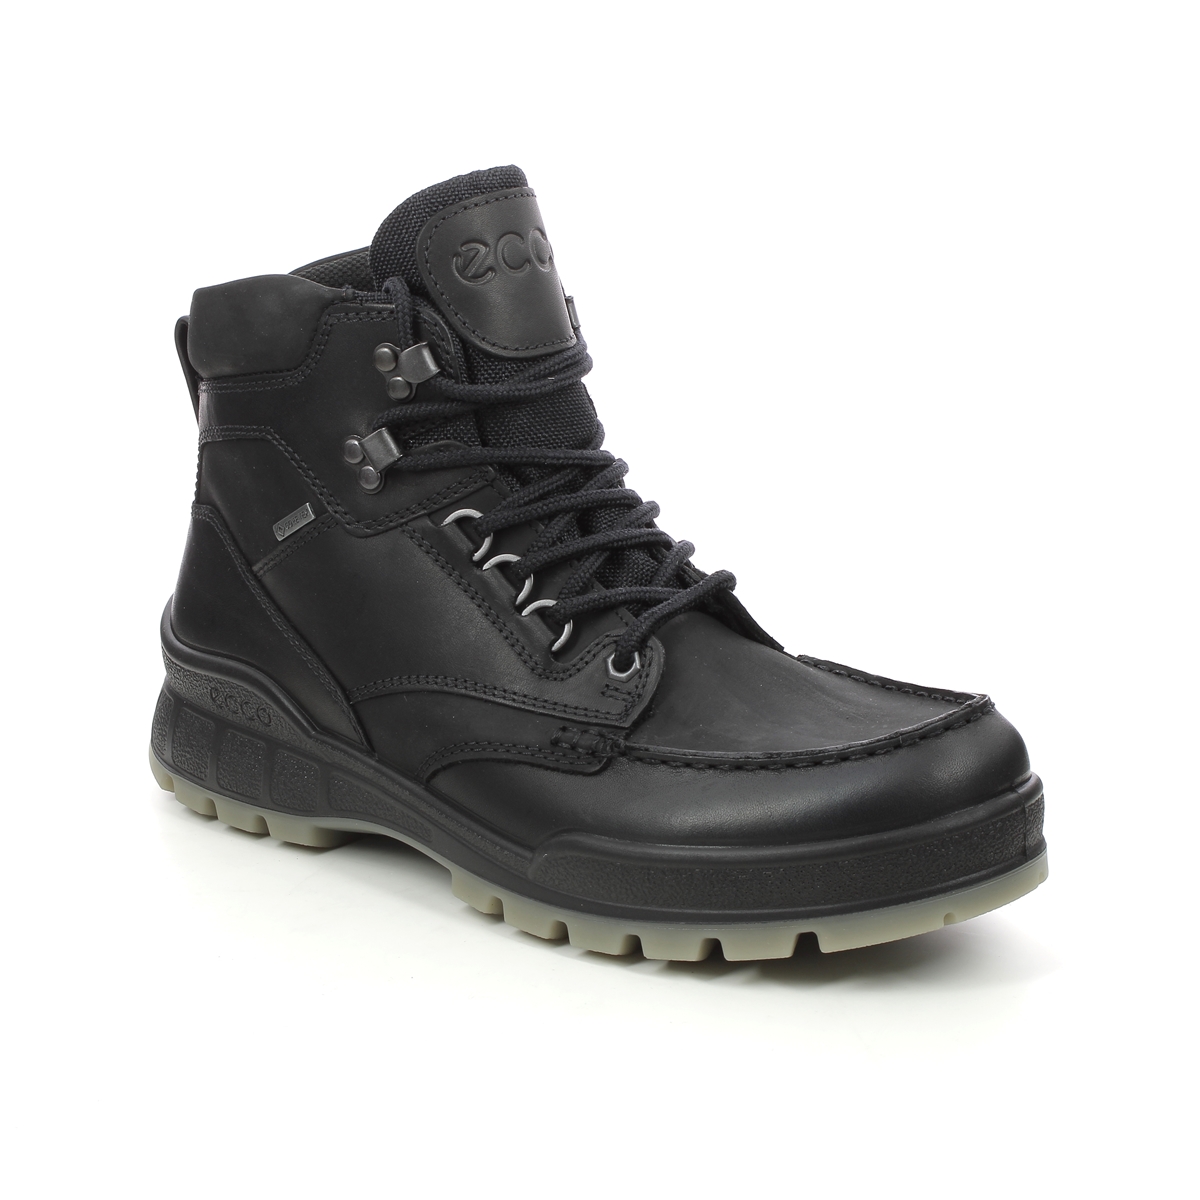 ECCO Track 25 Boot Gtx Black leather Mens Outdoor Walking Boots 831704-51052 in a Plain Leather in Size 46